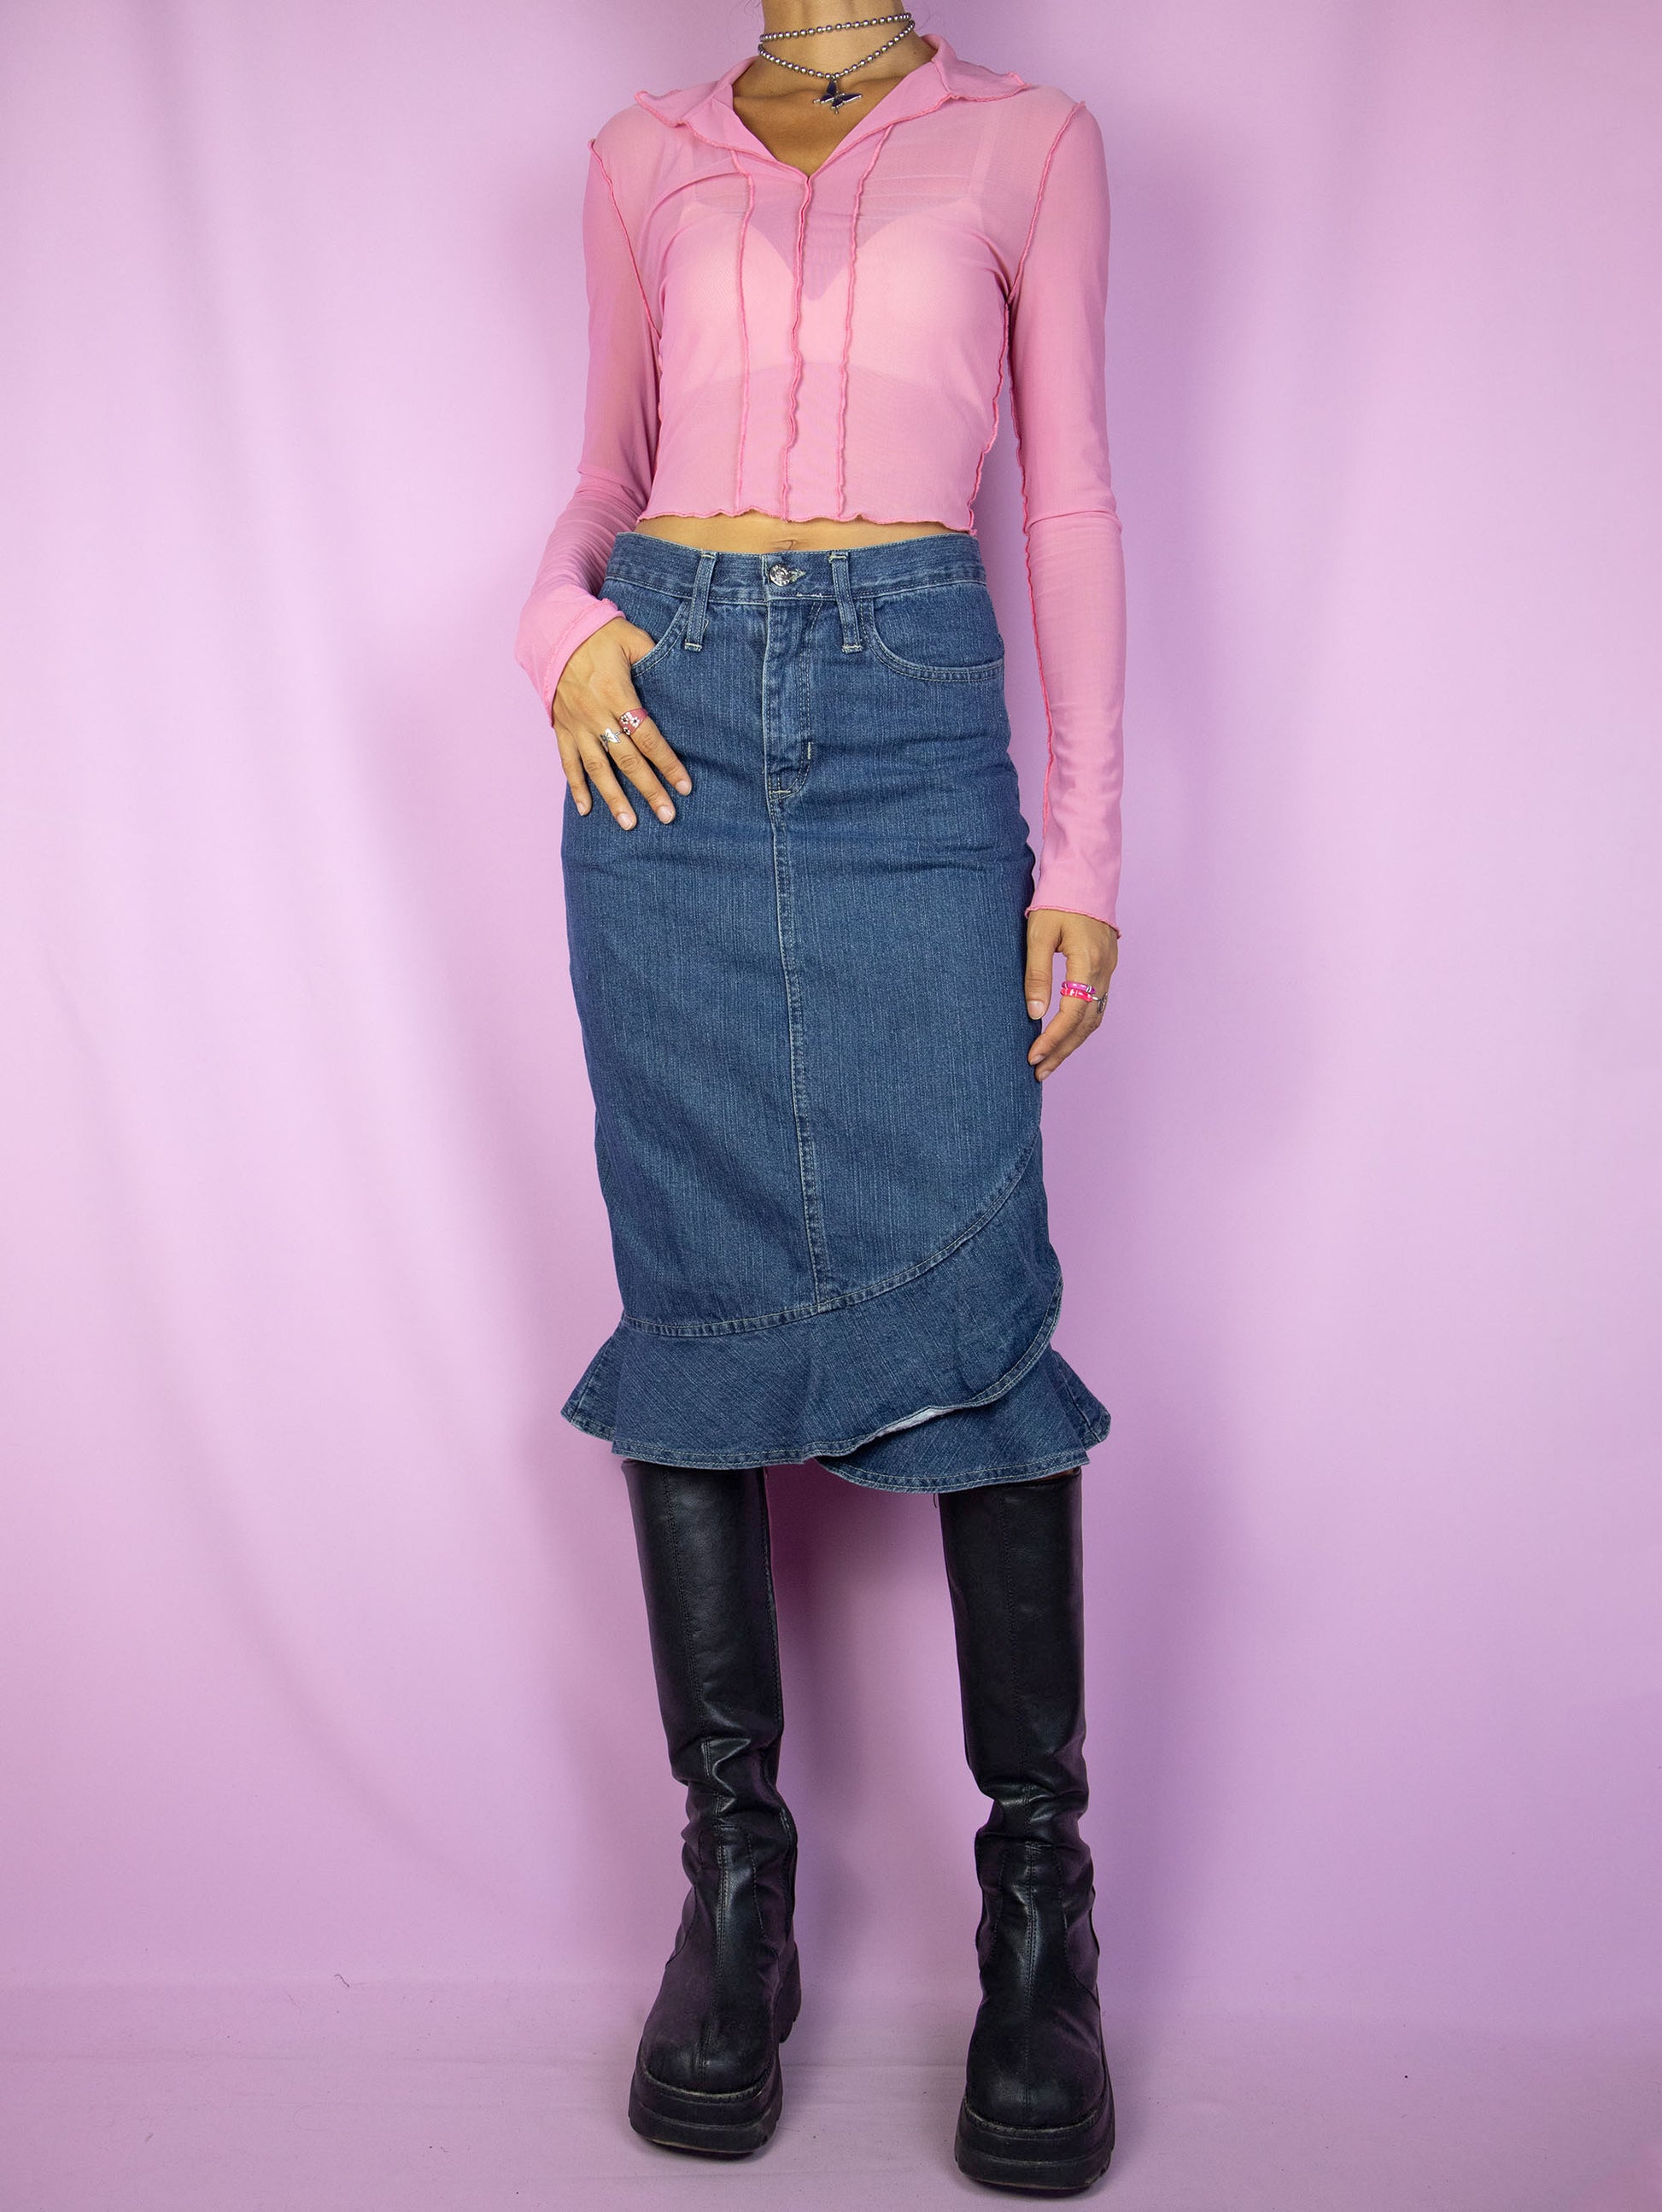 The Y2K Trumpet Denim Midi Skirt is a vintage 2000s jean skirt with a ruffled hem, back slit, pockets and zipper closure.